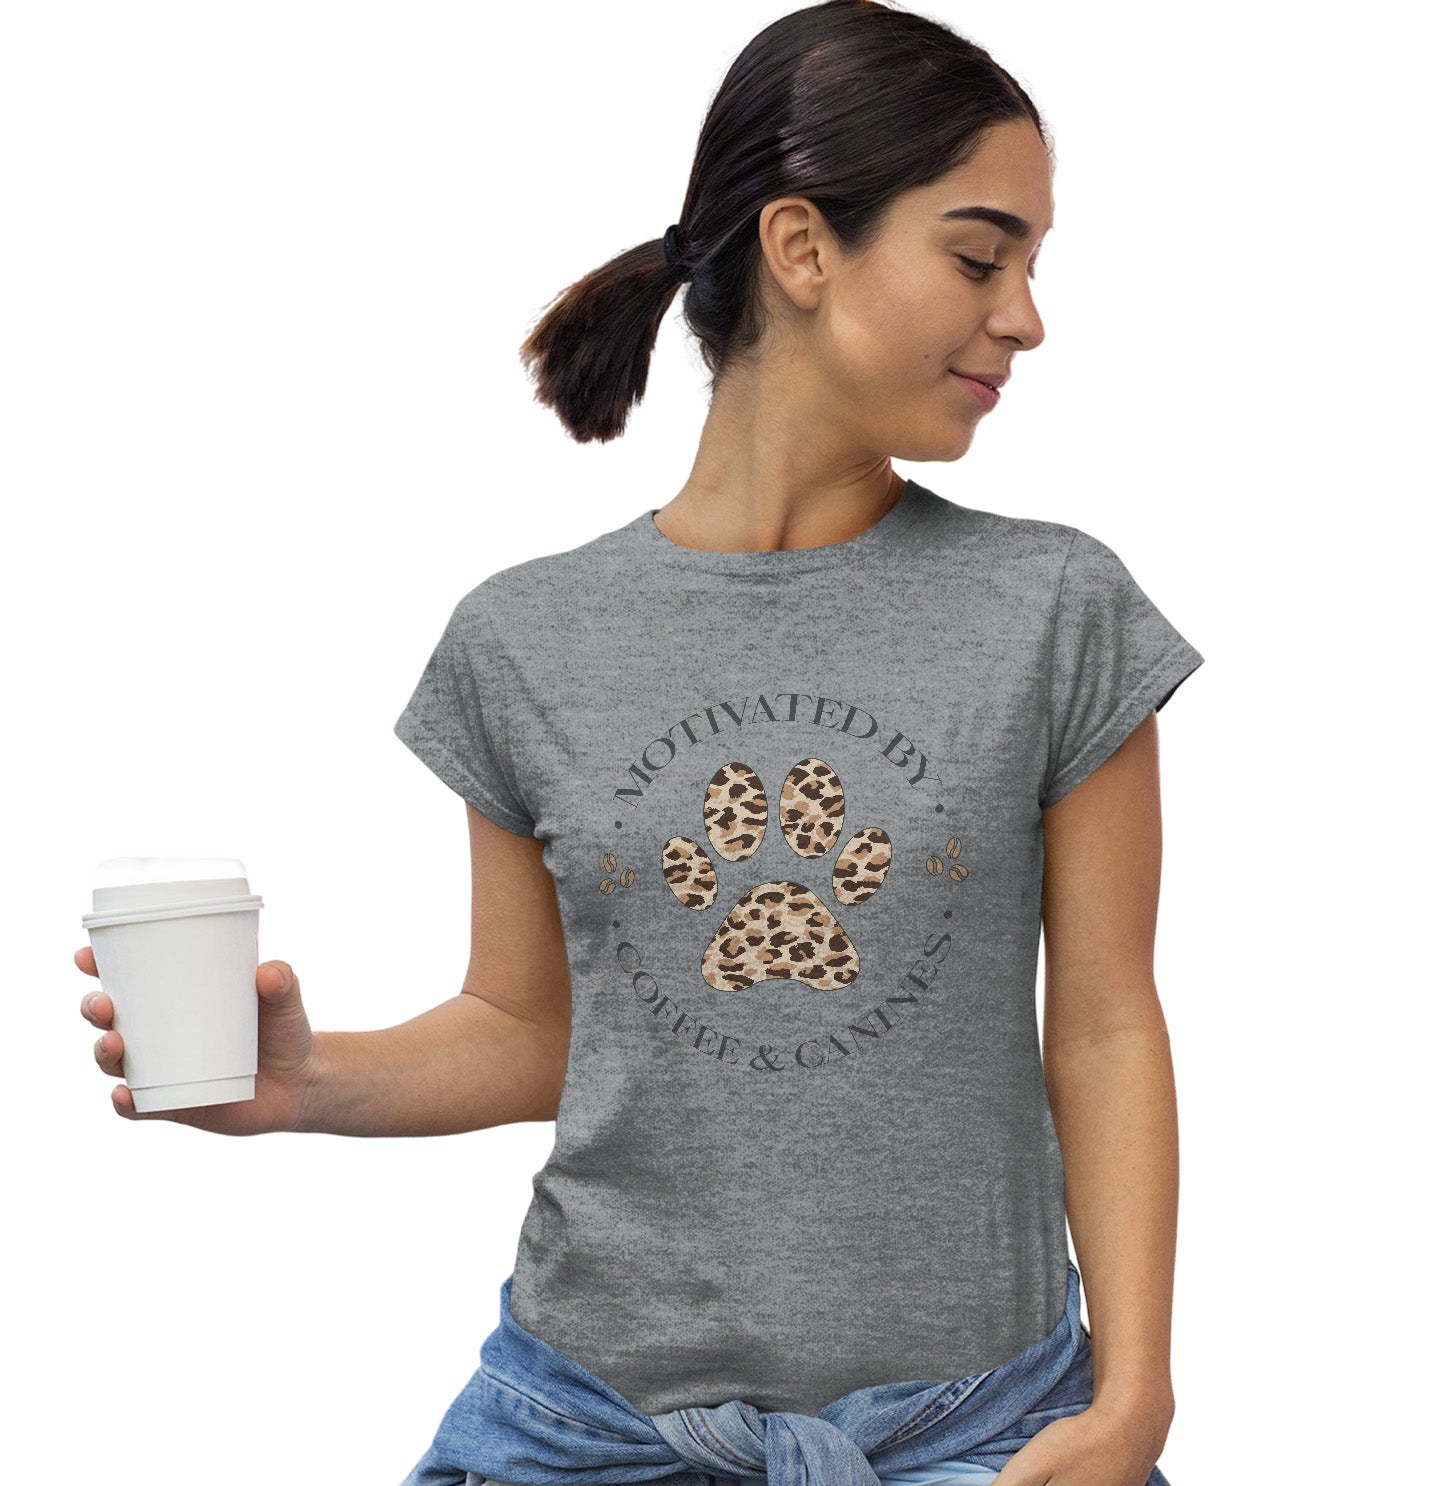 Motivated by Coffee and Canines - Women's Fitted T-Shirt